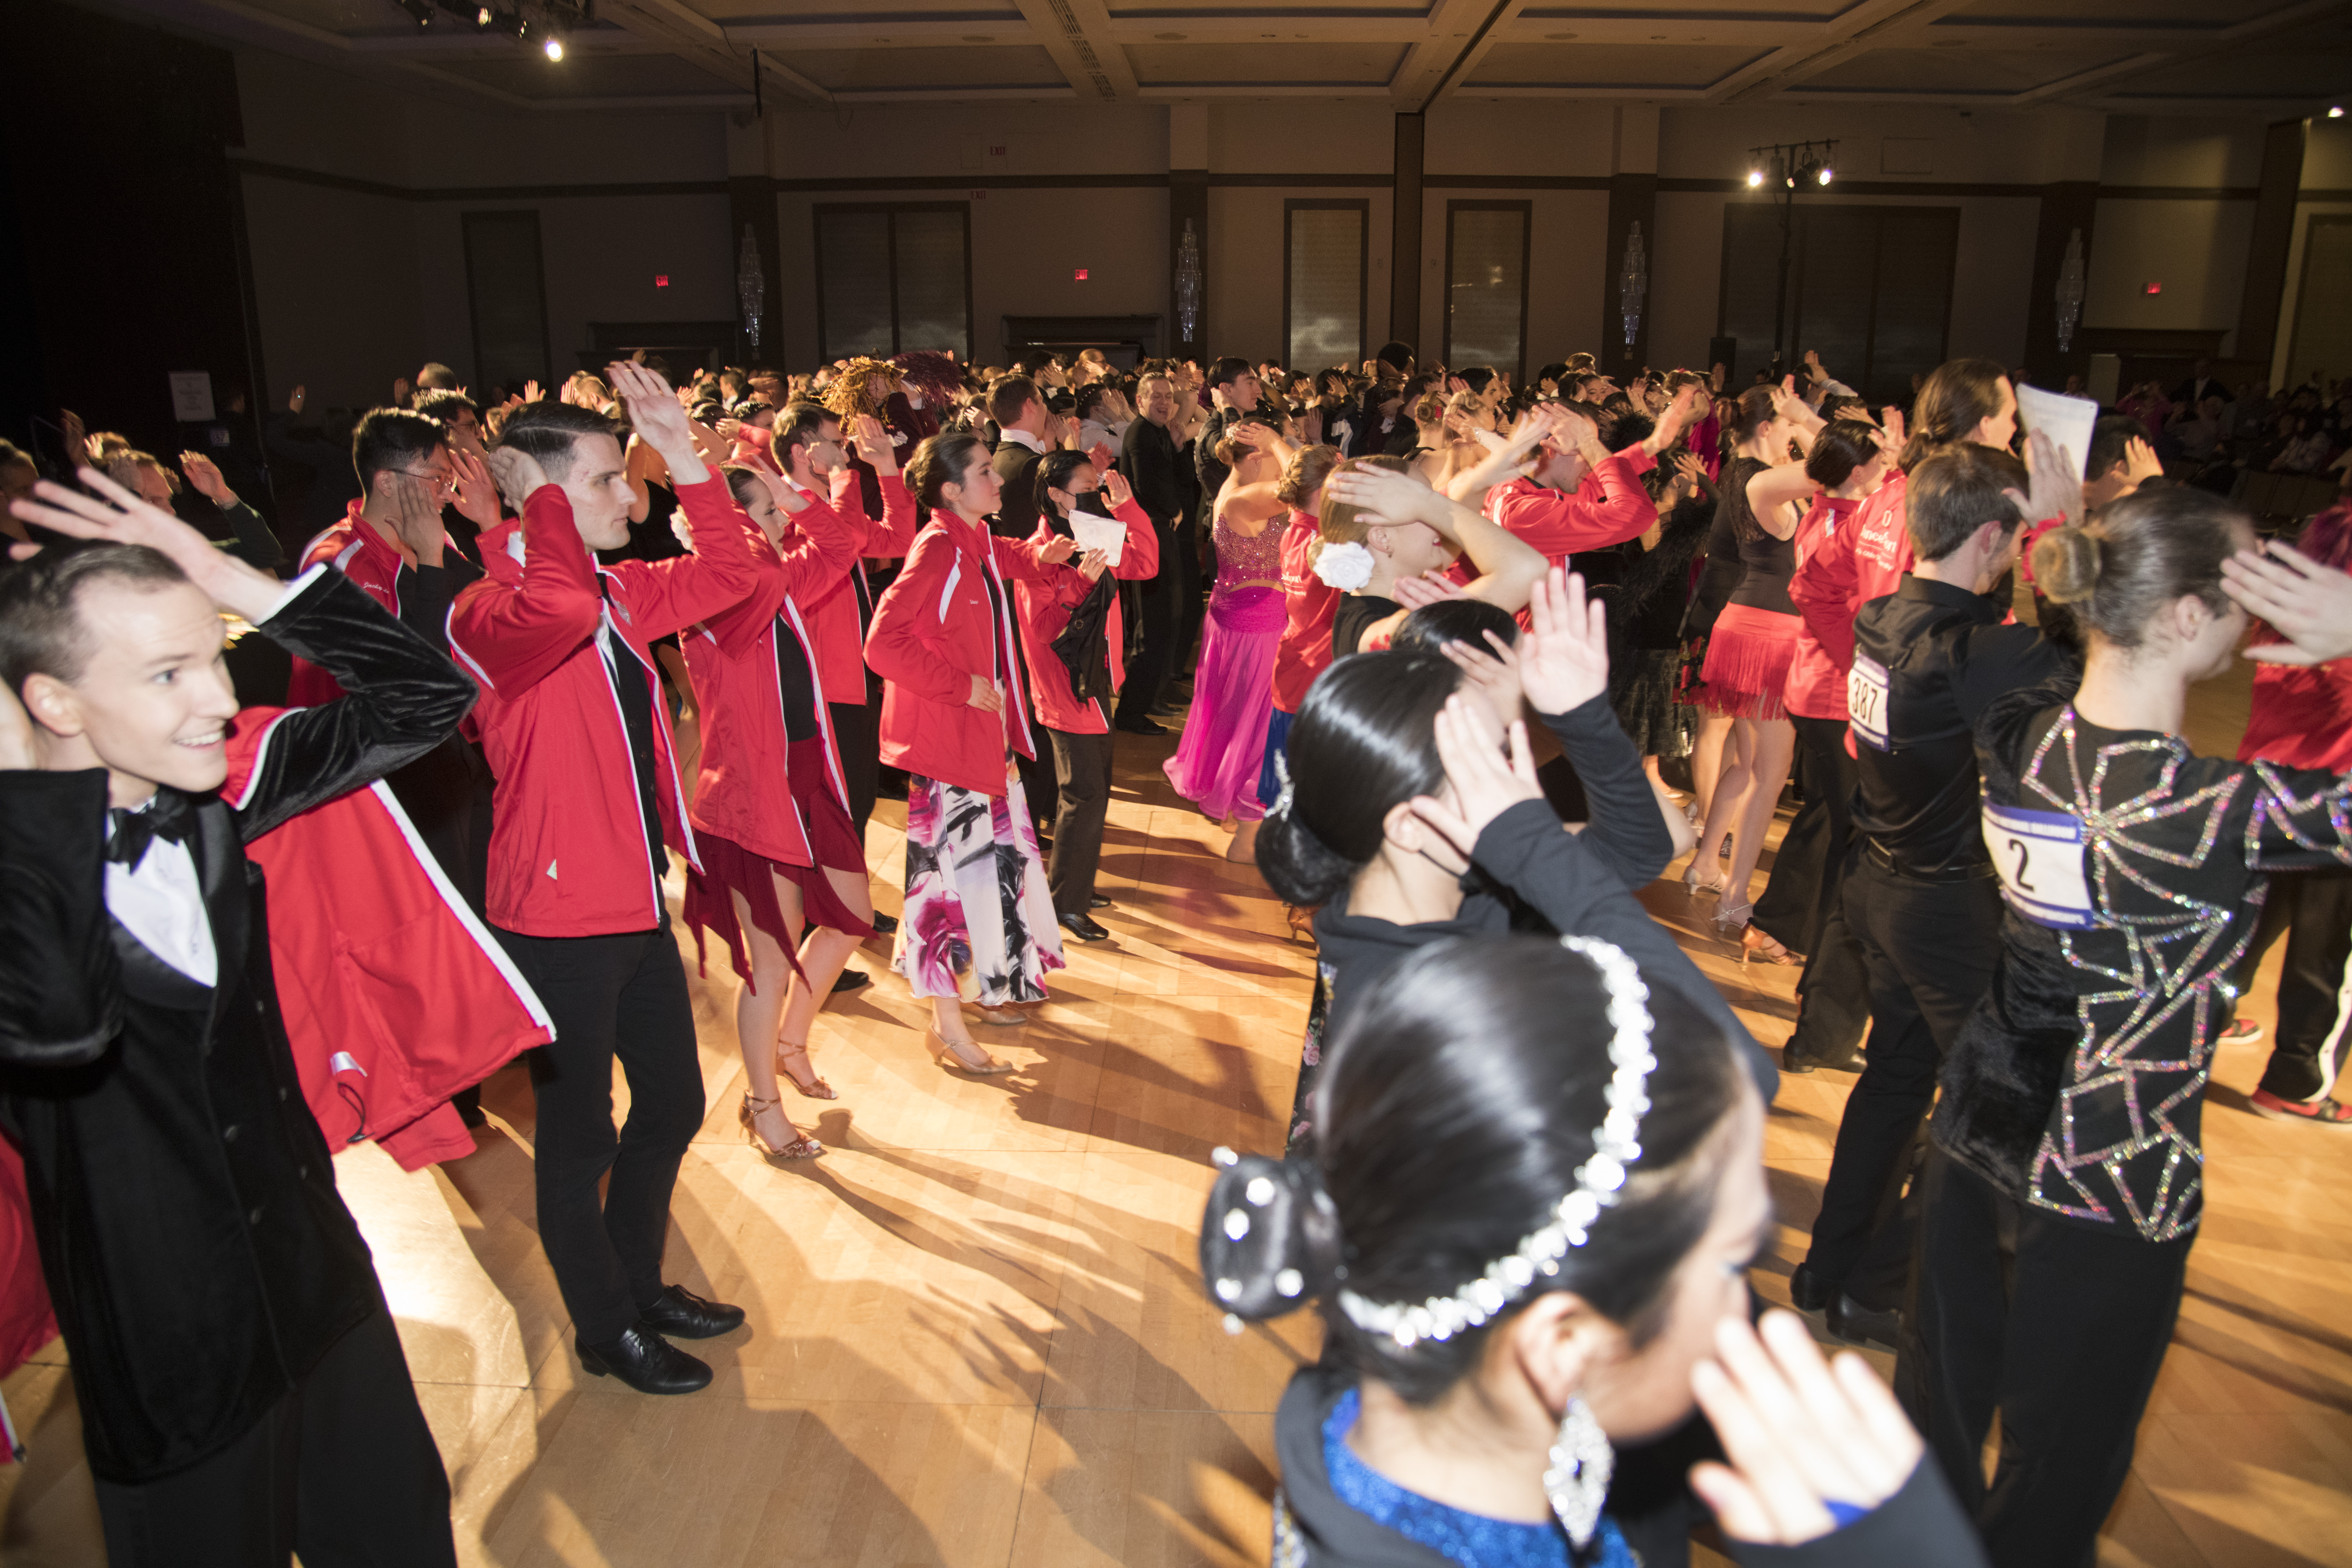 “The young college dancers added a lot of excitement to the competition,” exclaimed President Ken Richards. “They definitely raised the decibels in the ballroom!” Photo by Carson Zullinger.